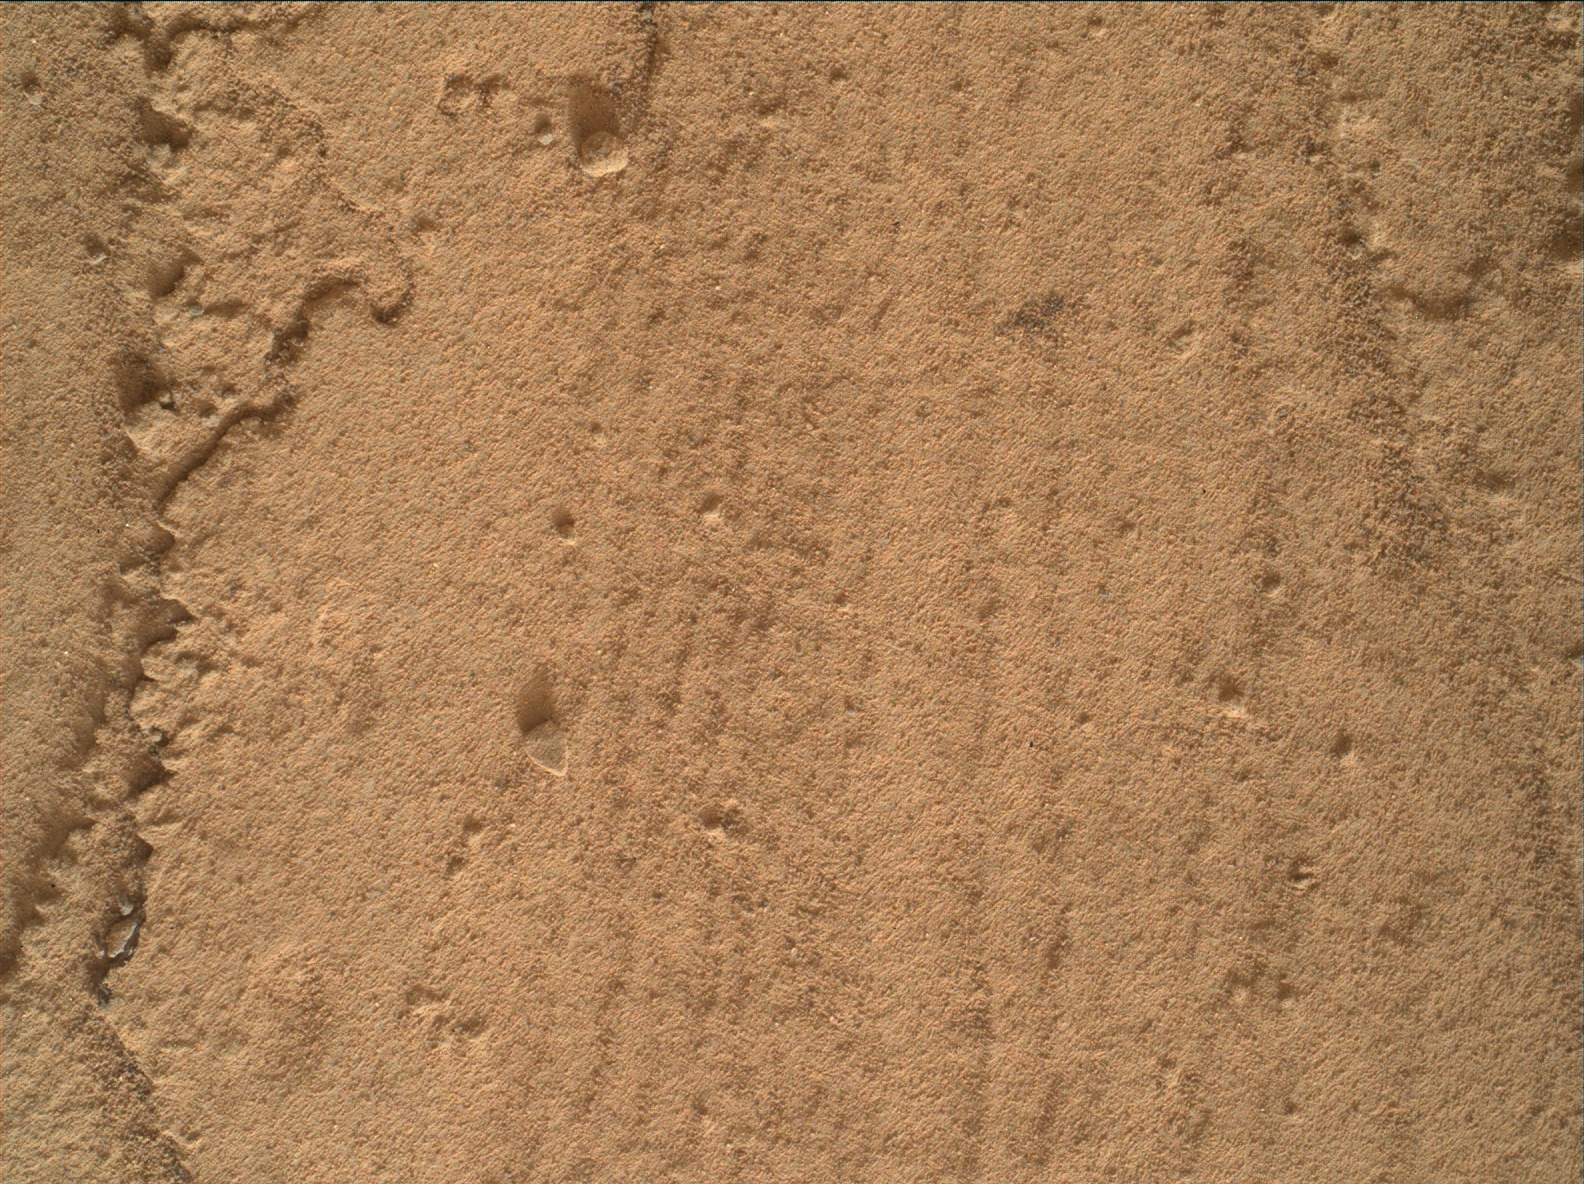 Nasa's Mars rover Curiosity acquired this image using its Mars Hand Lens Imager (MAHLI) on Sol 805